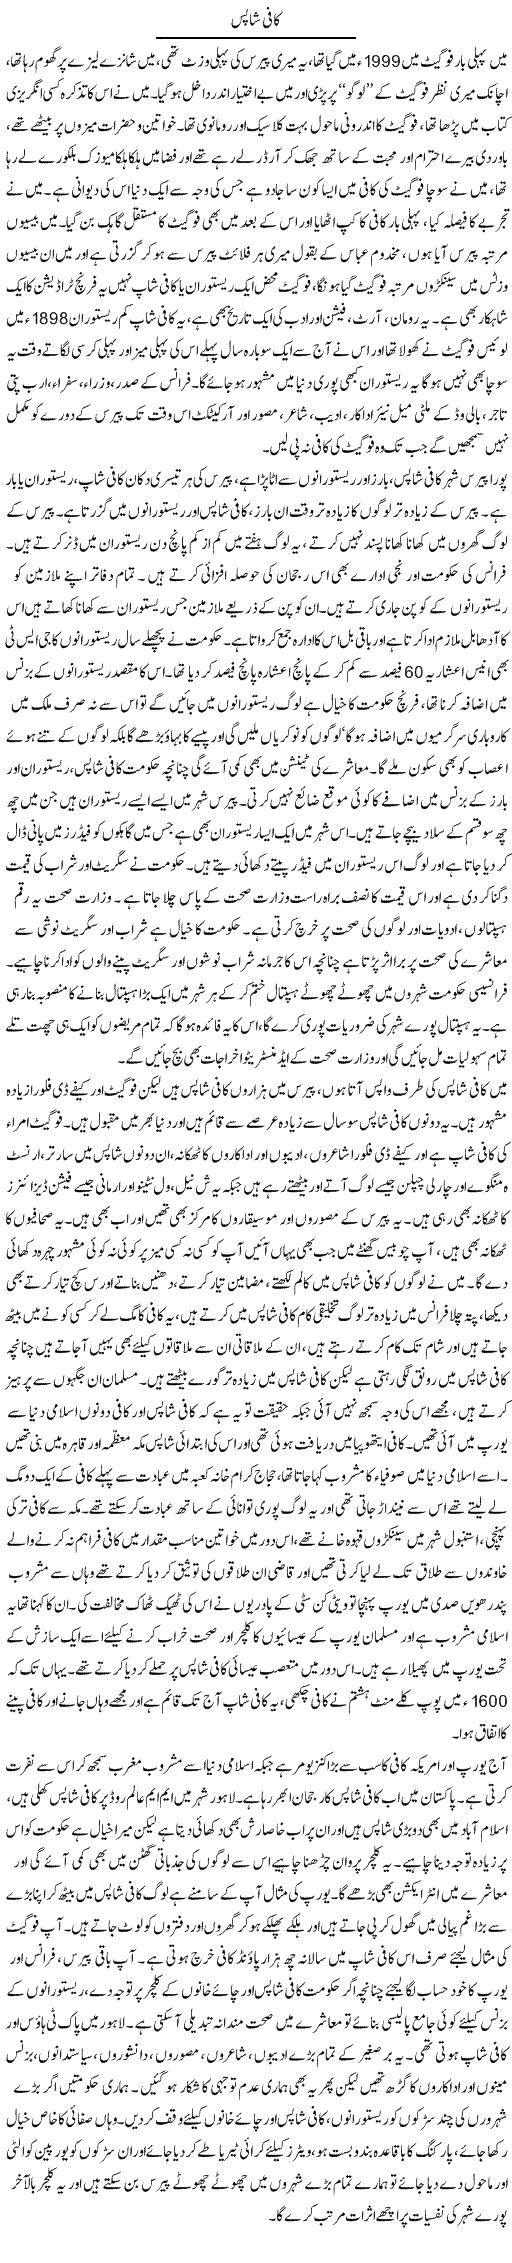 Cofee Shop Express Column Javed Chaudhary 21 March 2010